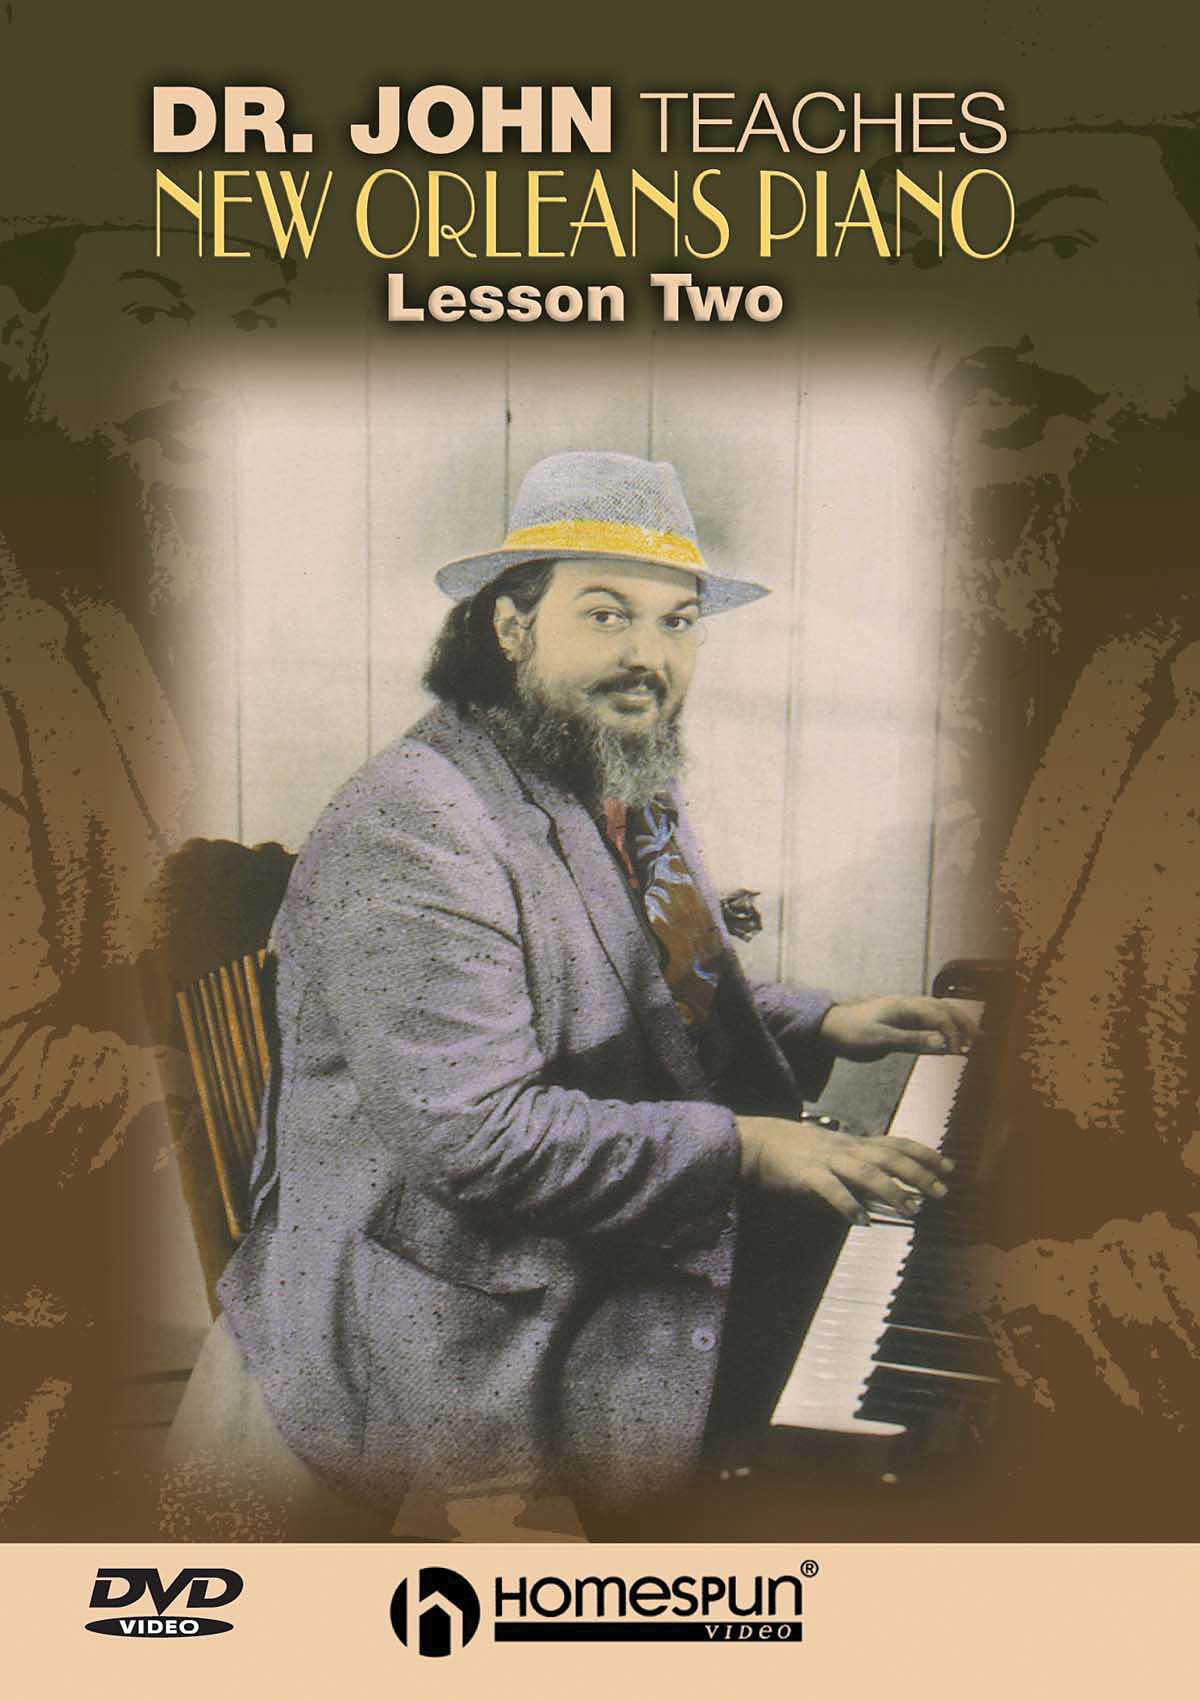 Image 2 of DVD - Dr.John Teaches New Orleans Piano: Vol. 2 - SKU# 300-DVD198 : Product Type Media : Elderly Instruments